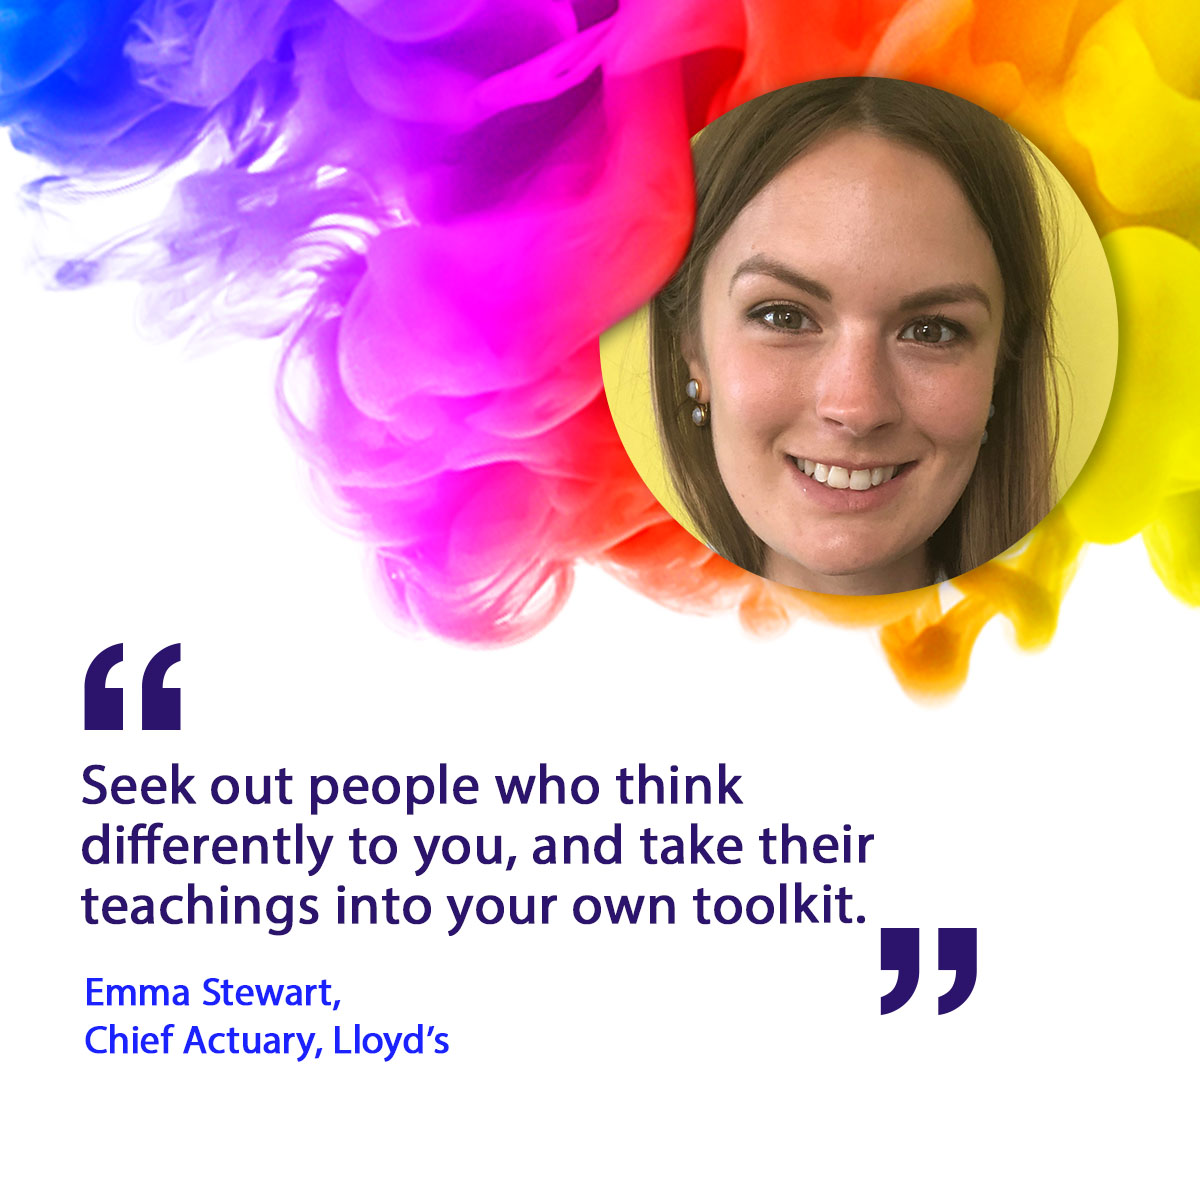 Emma Stewart says seek out people who think differently to you and take their teachings into your own toolkit.